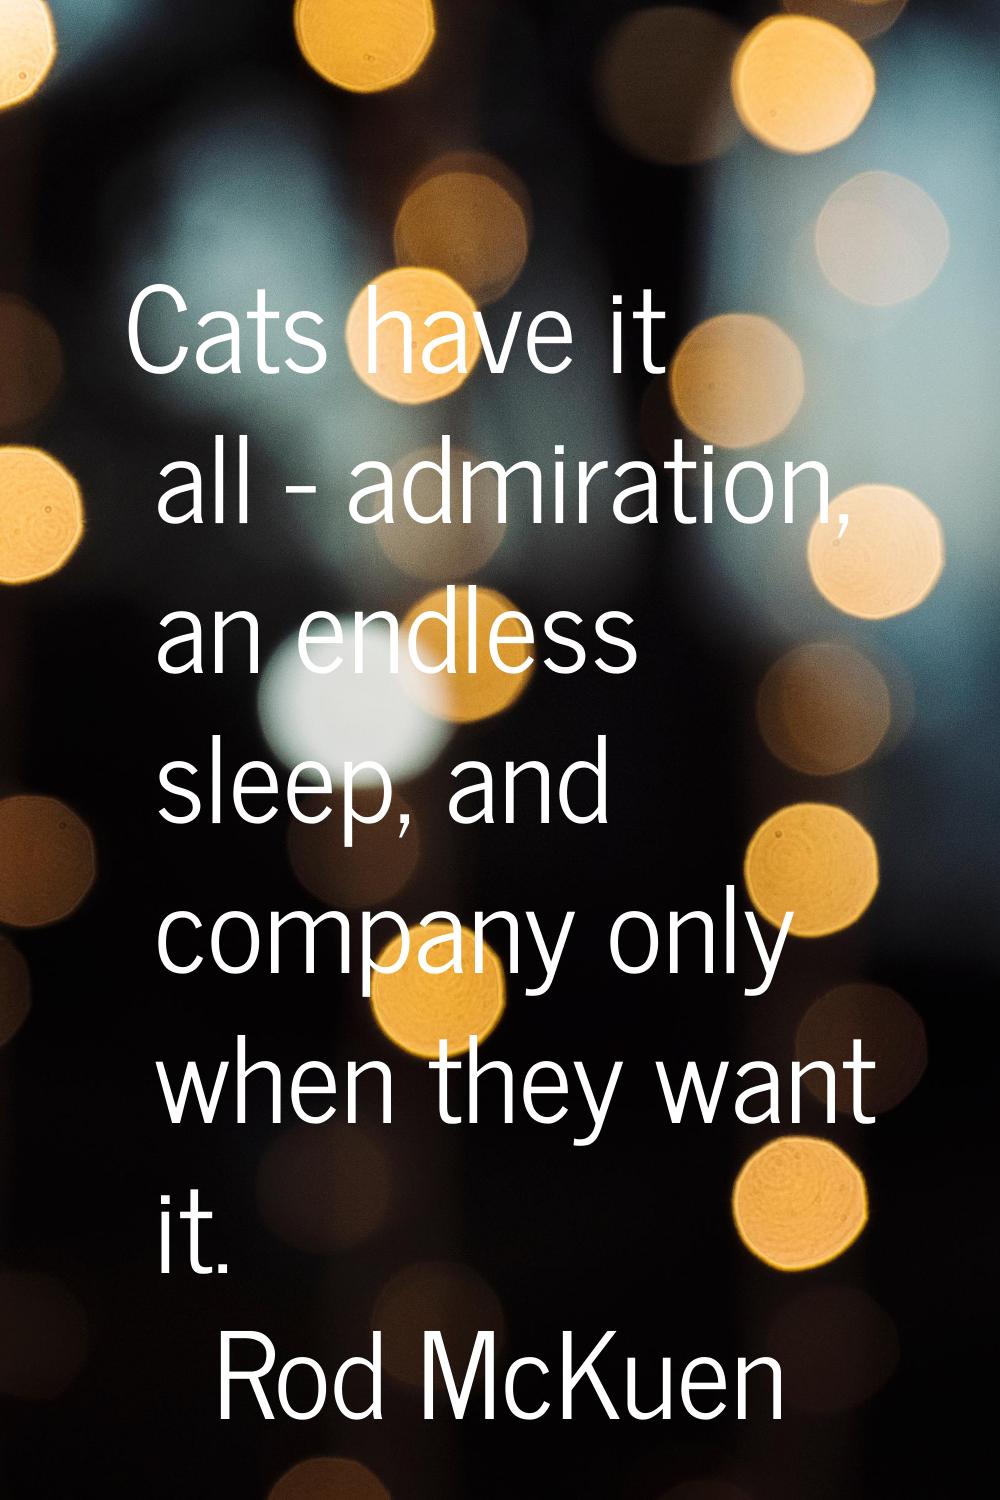 Cats have it all - admiration, an endless sleep, and company only when they want it.